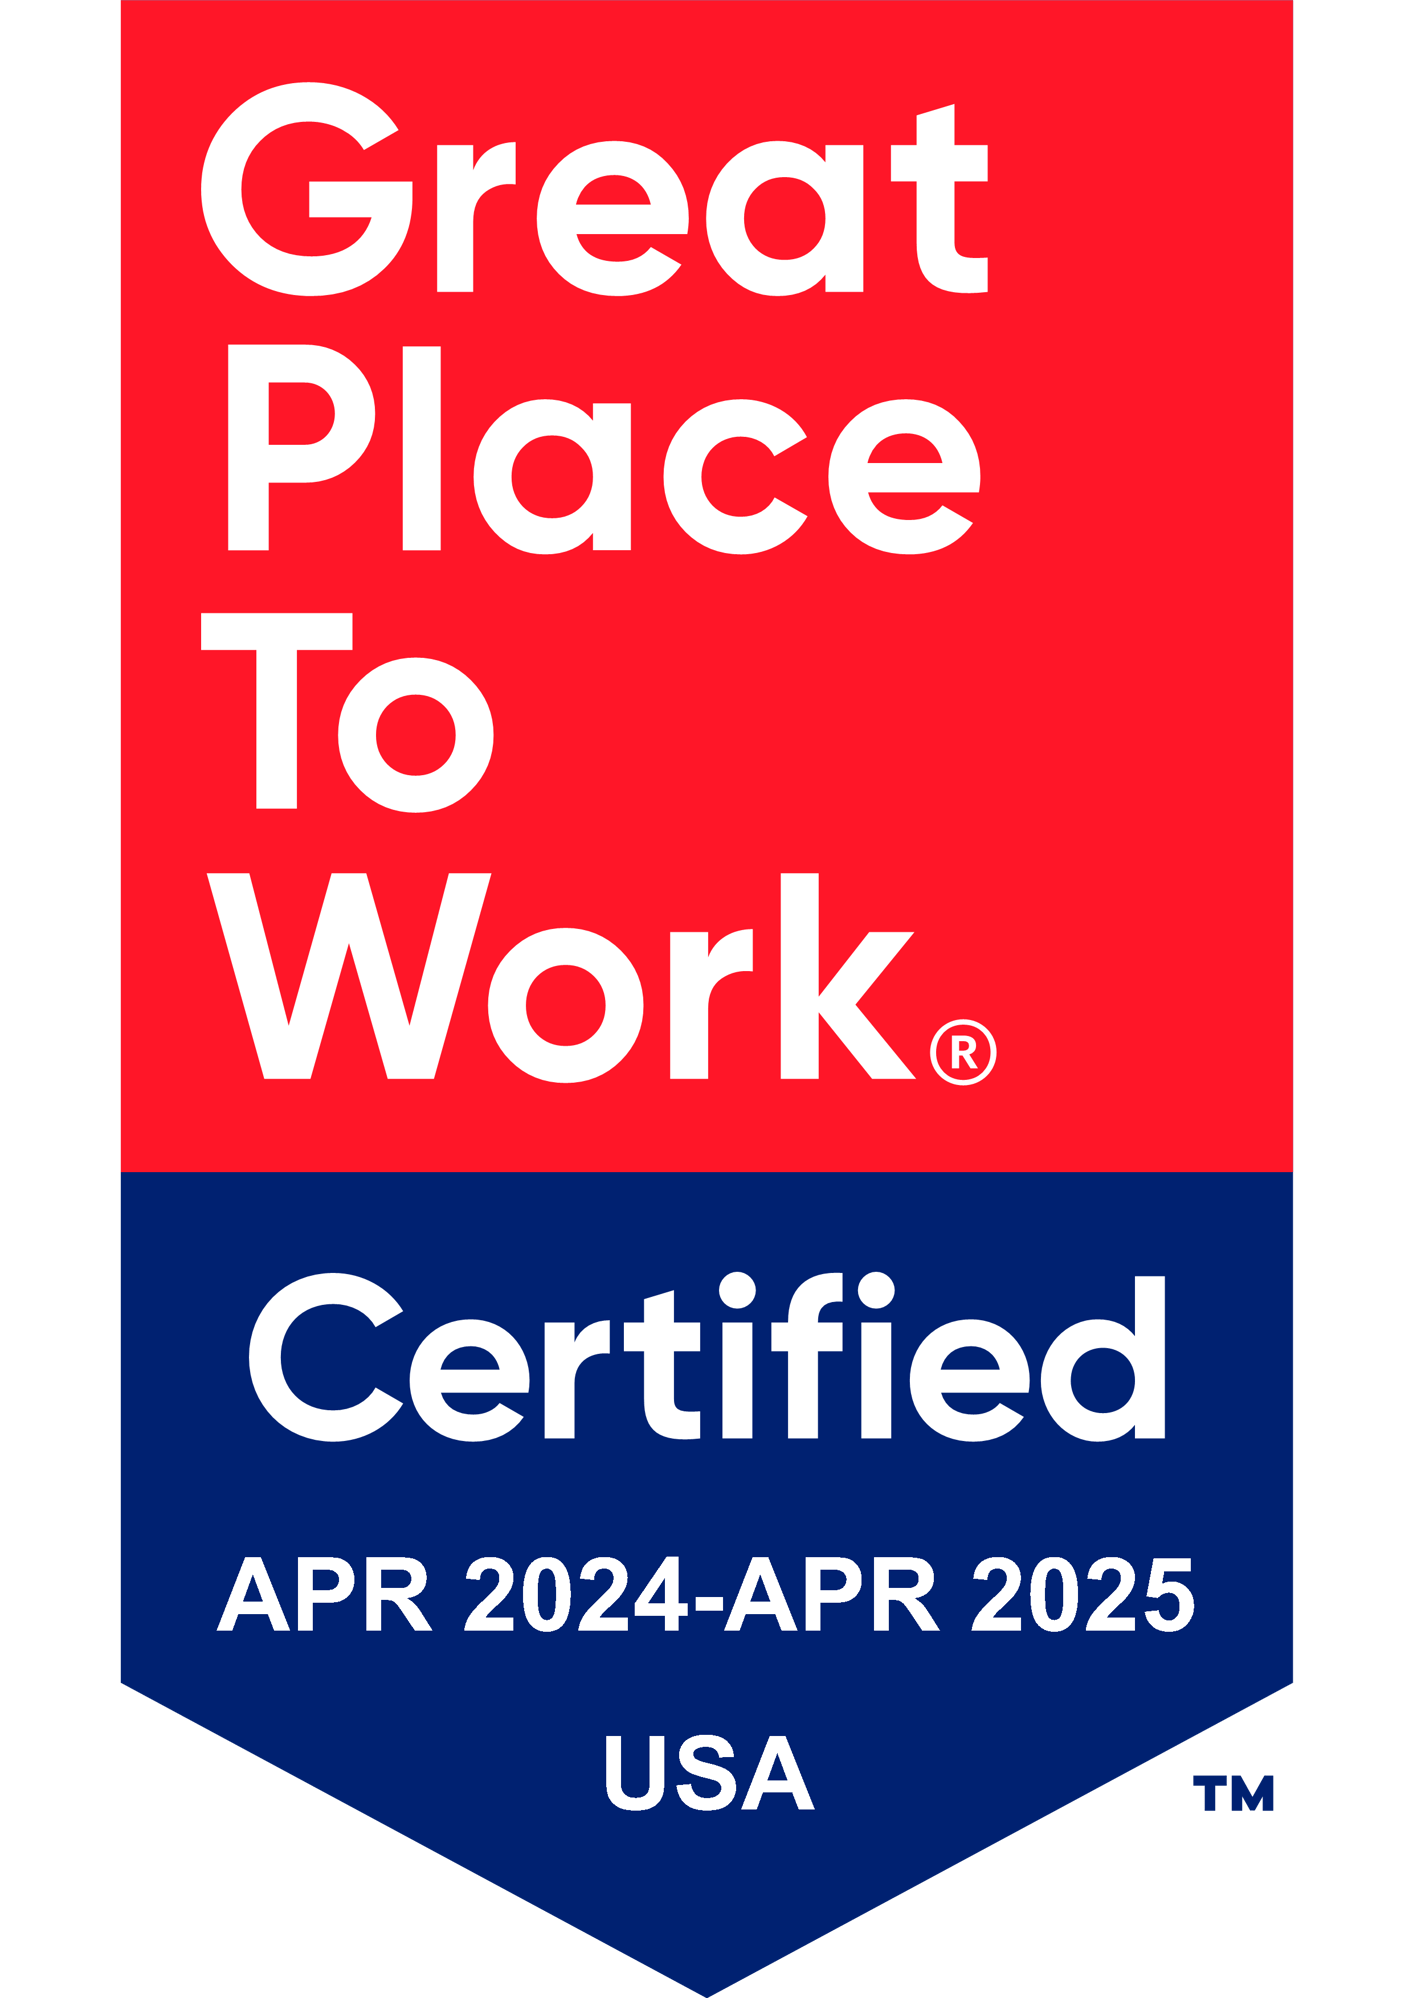 Great Place to Work certification badge for April 2024- April 2025.